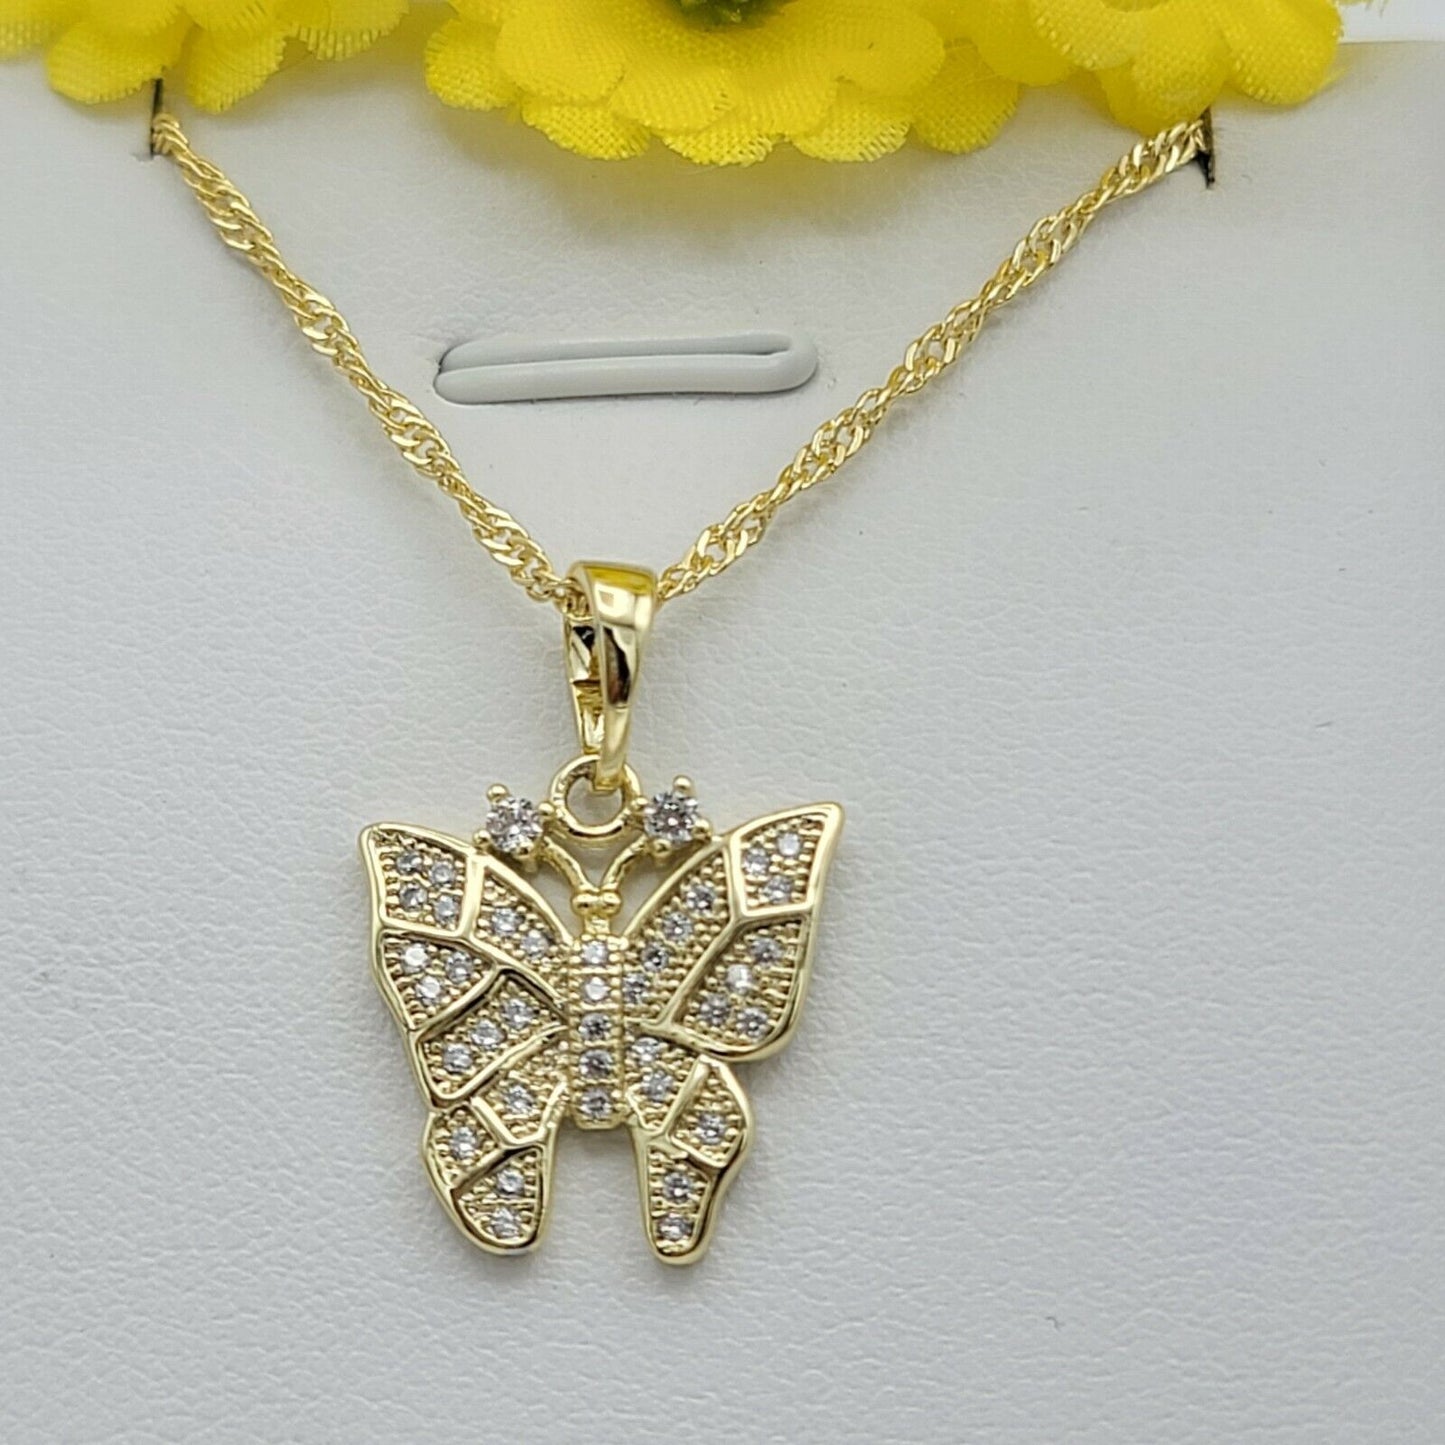 Necklaces - 14K Gold Plated. Small Butterfly Pendant & Chain.